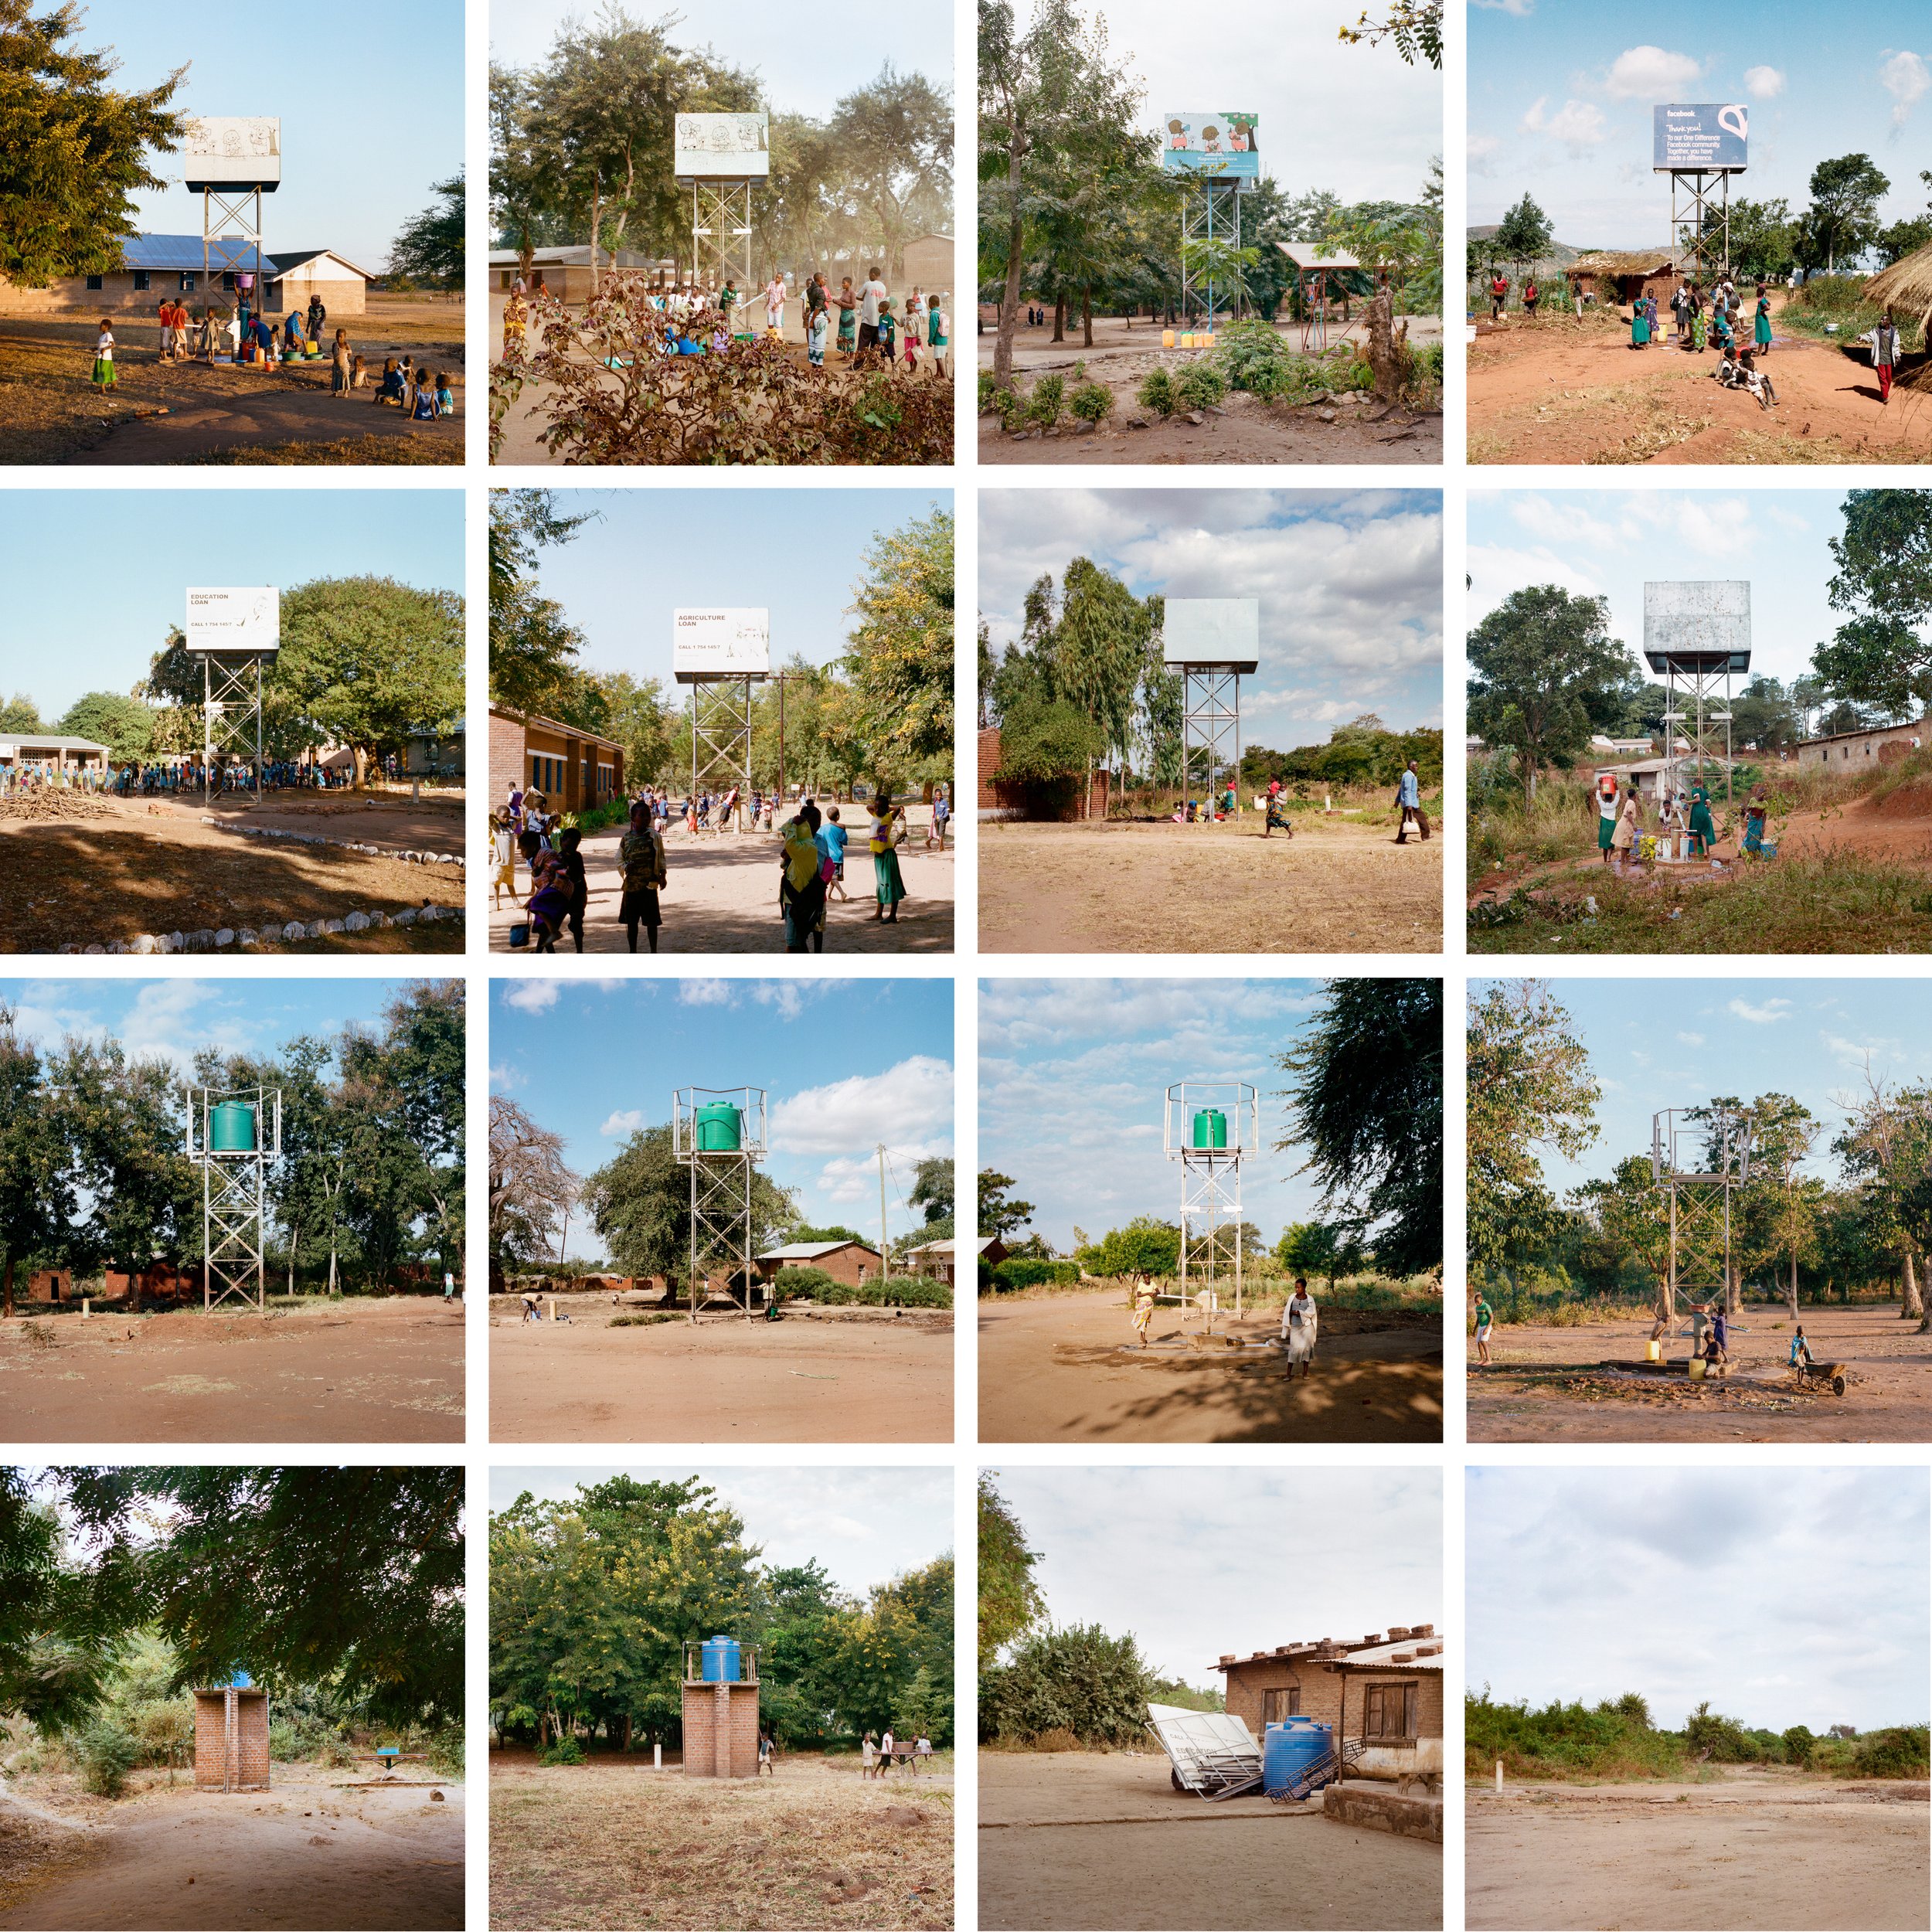  The empty, unused towers from the sites of 16 broken PlayPumps. PlayPumps photographed at various locations in Chikhwawa, Thyolo, and Balaka Districts in Malawi from June 9-13, 2015. 